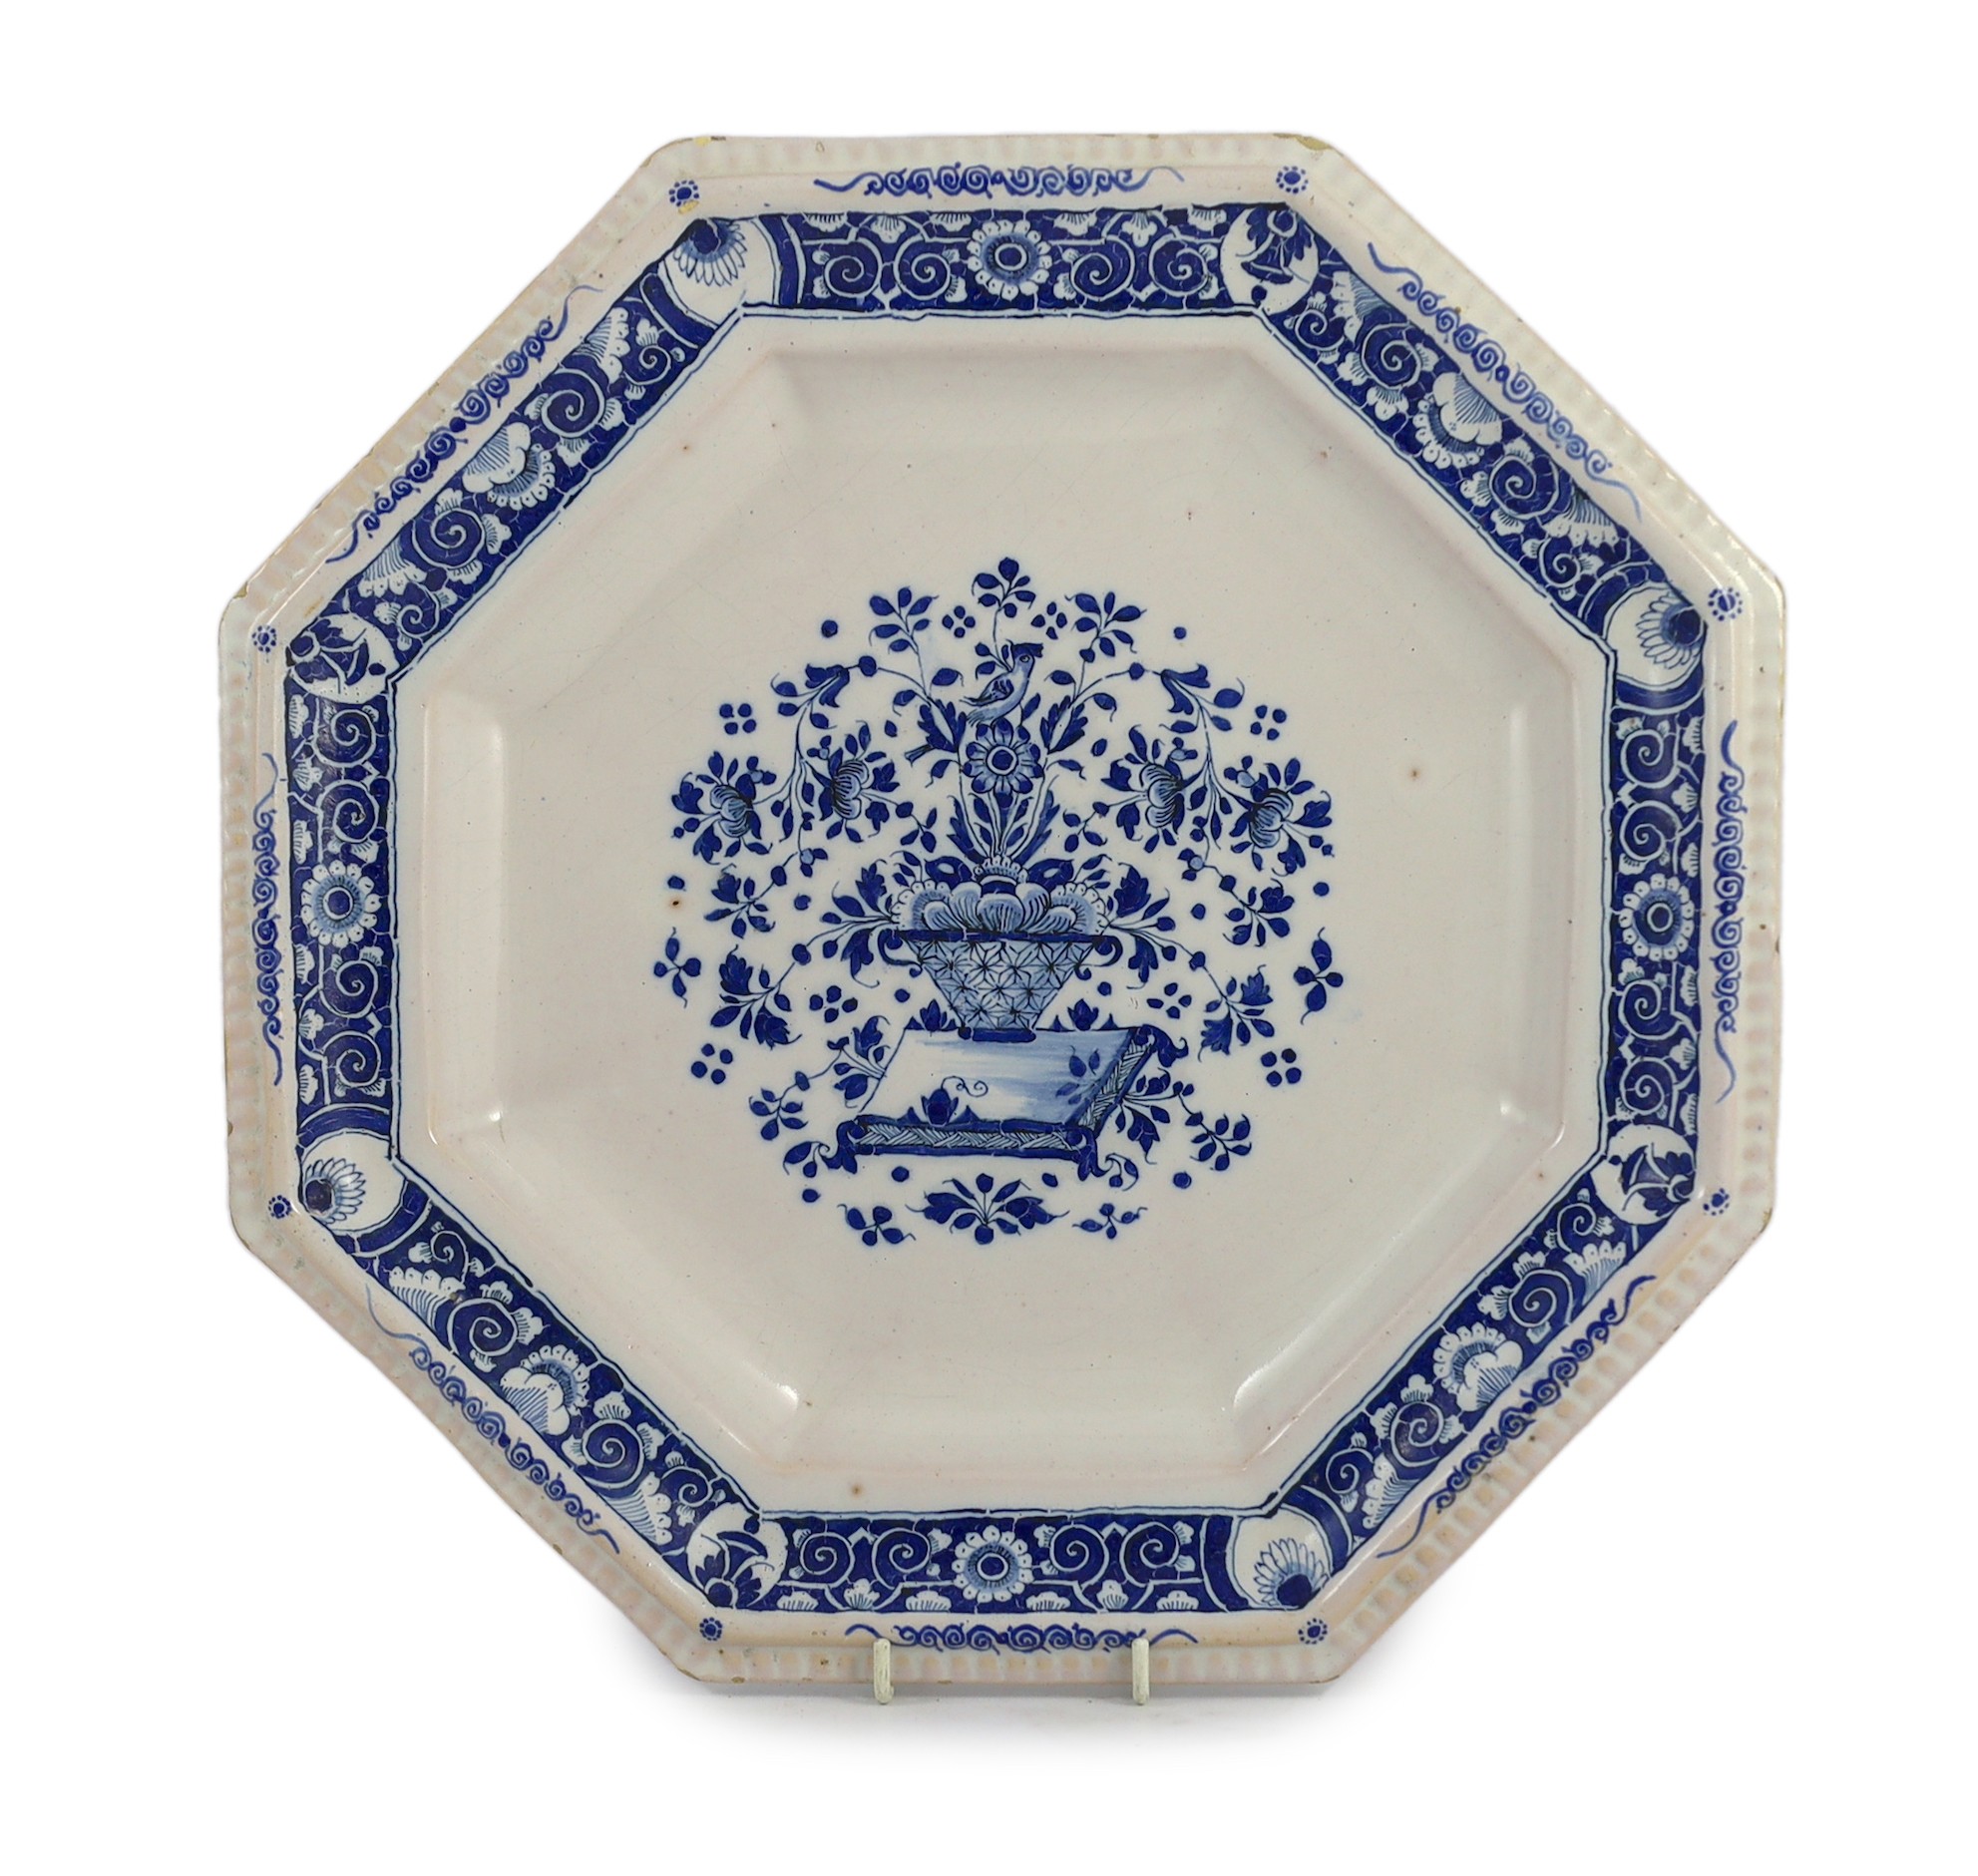 A large Strasbourg faience octagonal dish, c.1720-40, 35.5cm wide                                                                                                                                                           